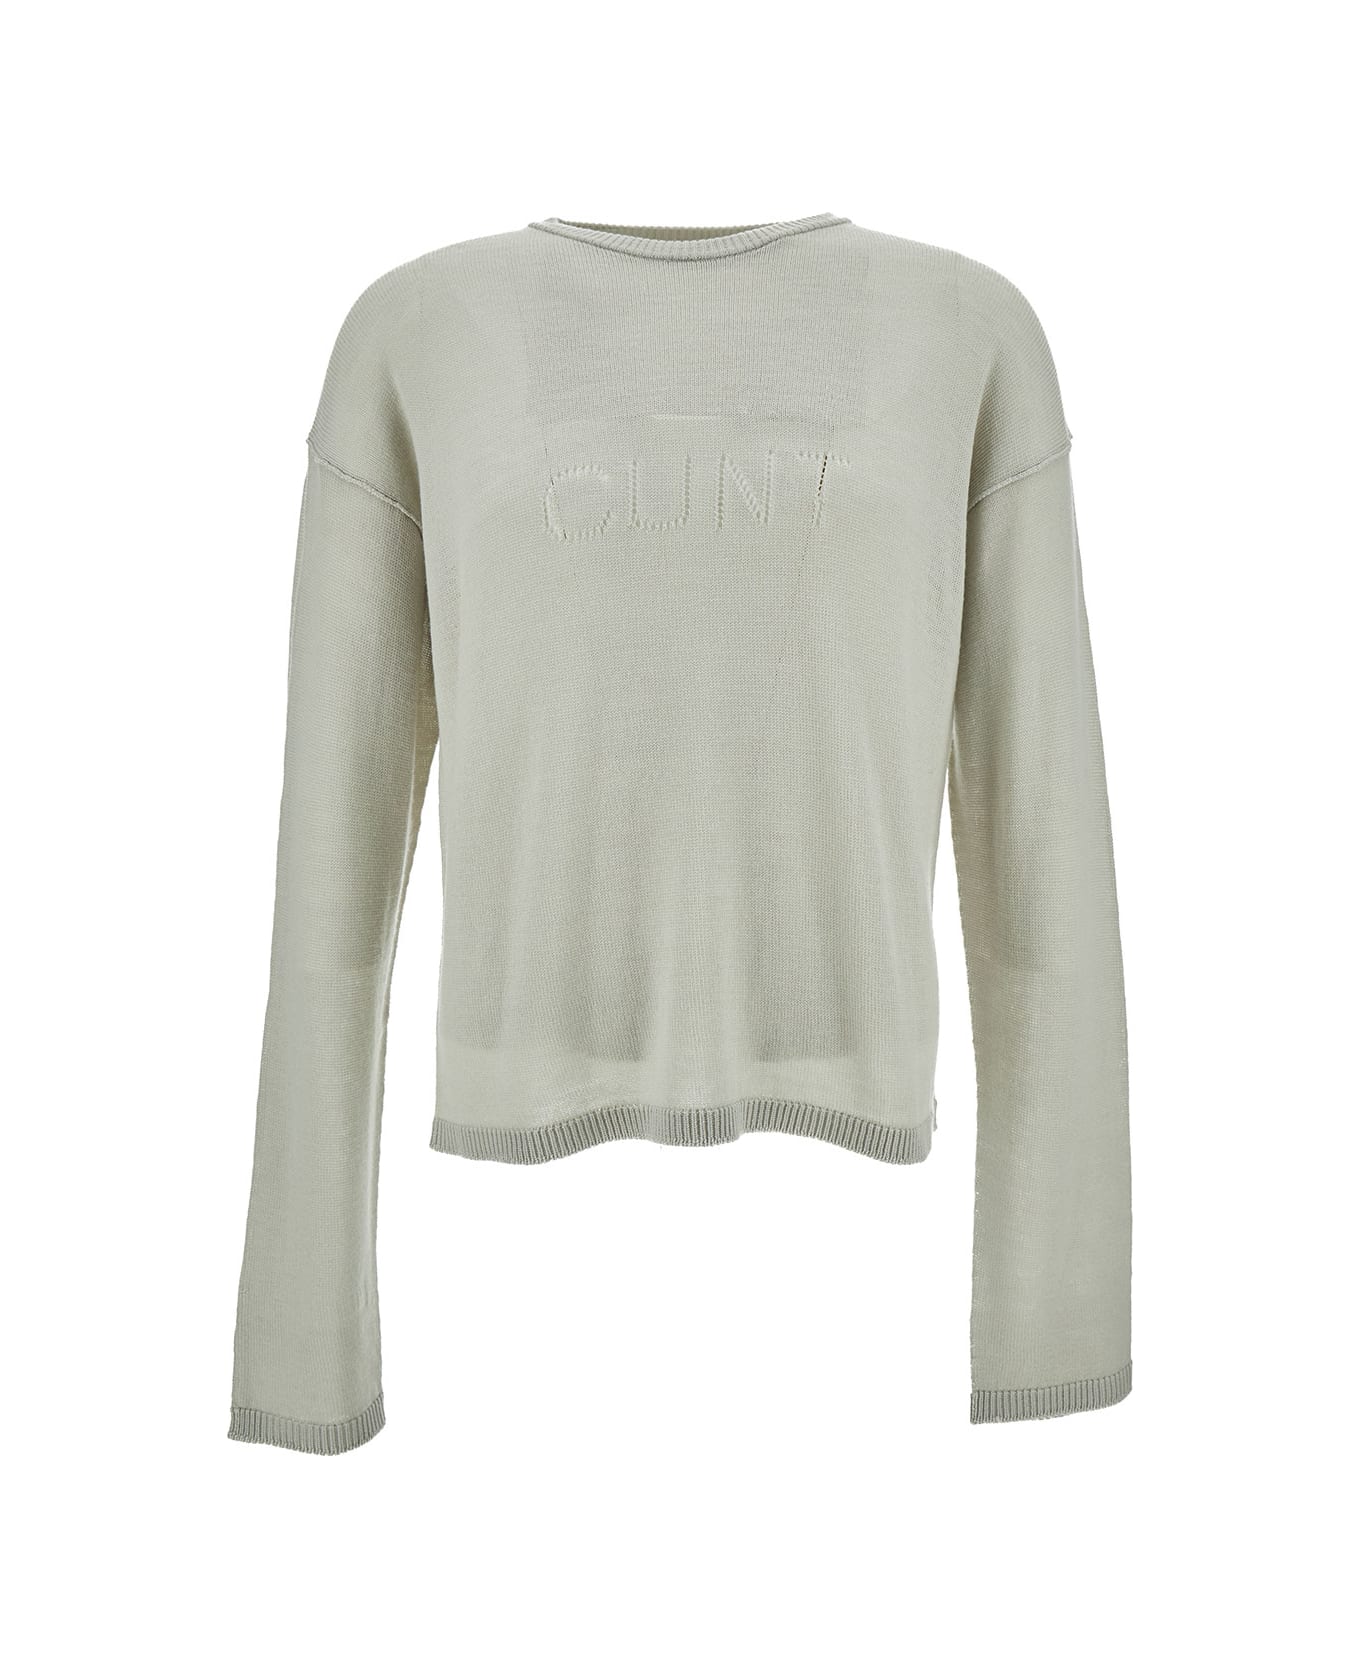 Rick Owens Grey Long Sleeve Top With Cunt Writing In Wool Man - Grey